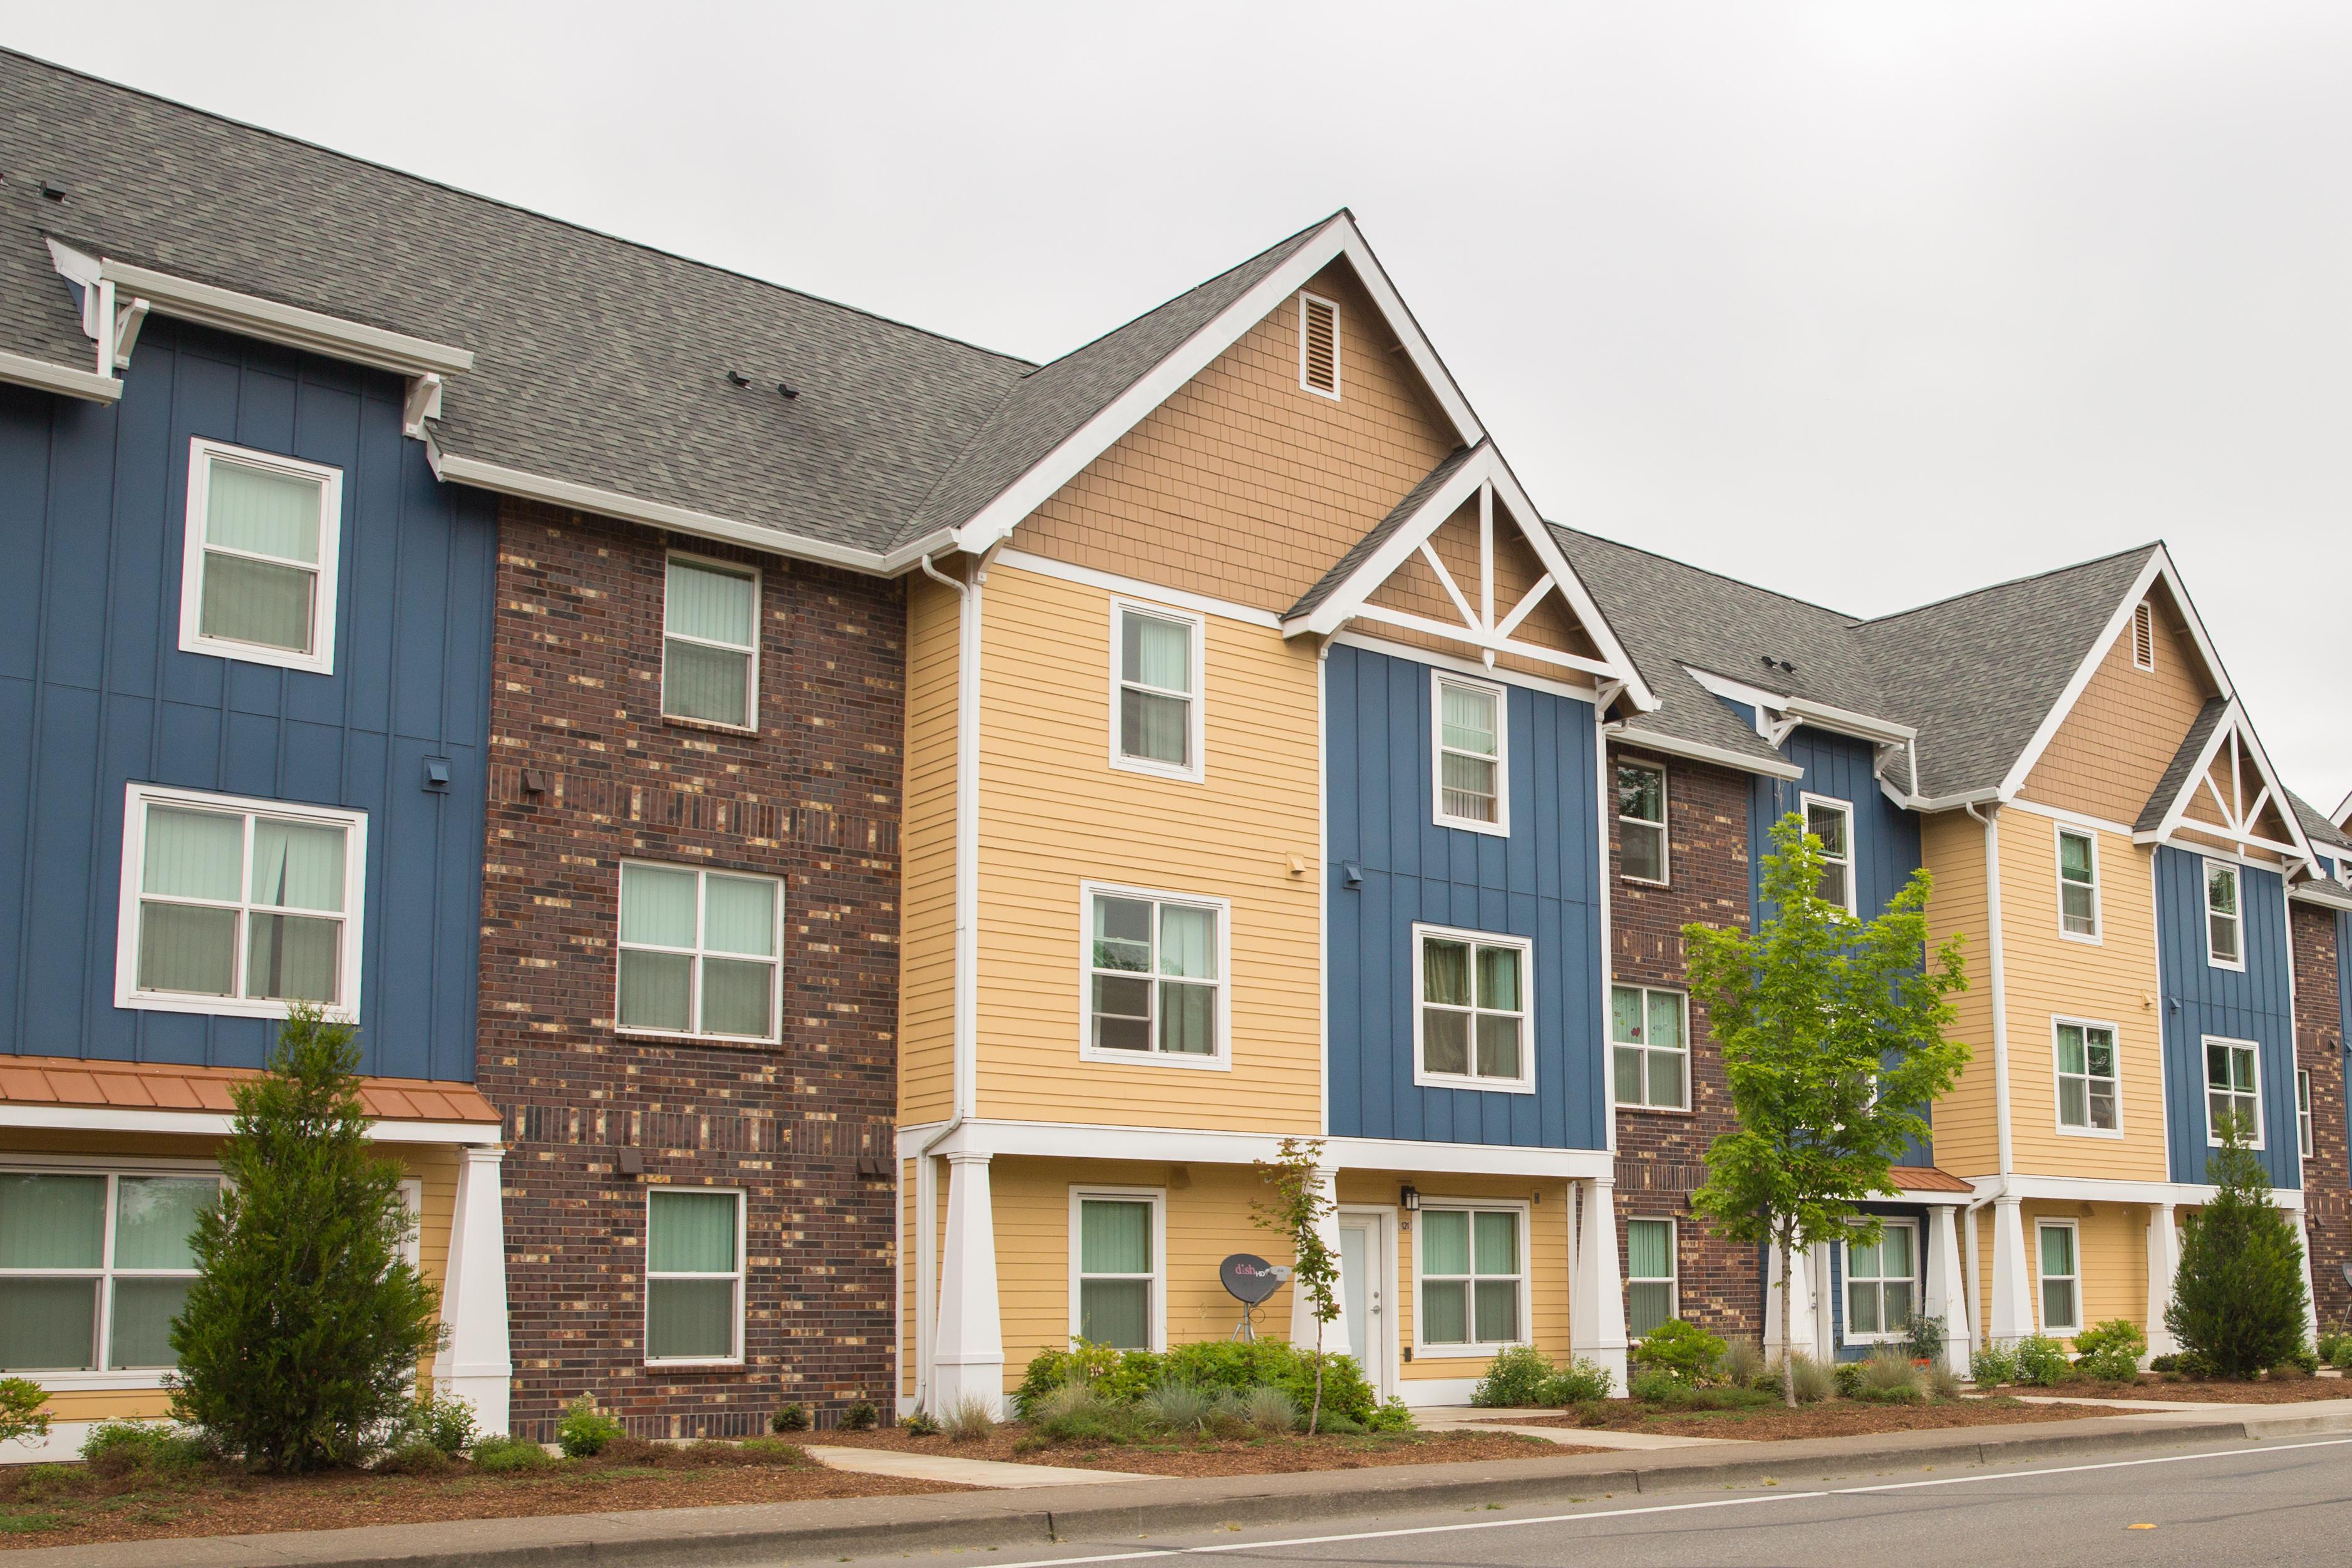 The 54-unit Woodwind Apartments in Albany, Ore., sits on the site of a 22-unit mobile home park. The complex was built in 2015 by Innovative Housing, Inc., which develops housing for low-income families.